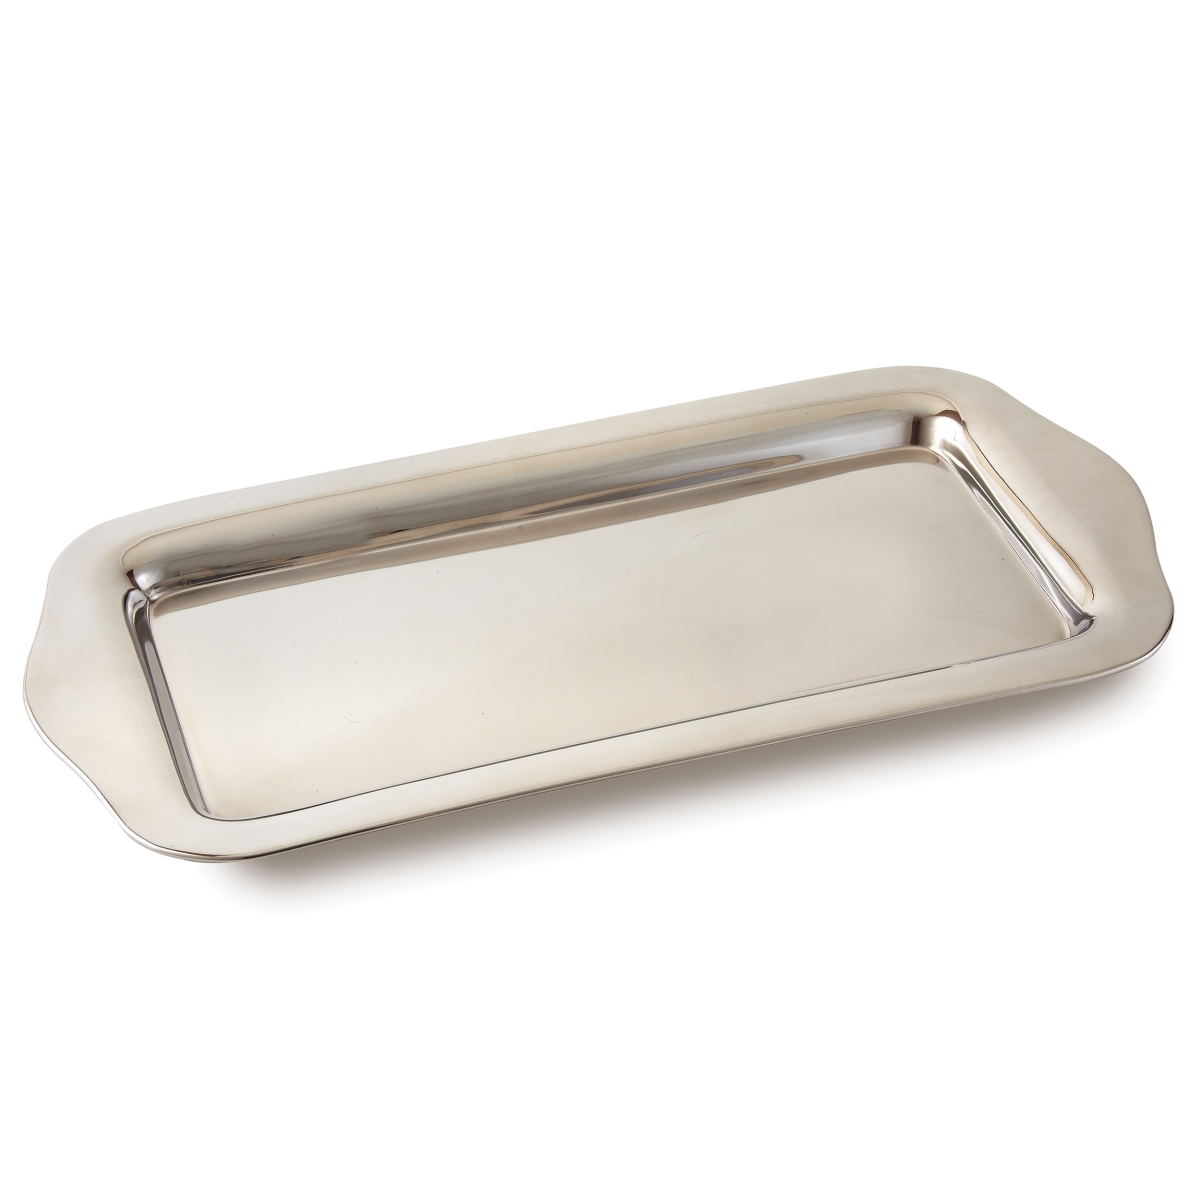 72387 15 X 7.5 In. Amenity Stainless Steel Rectangular Serving Tray, Silver